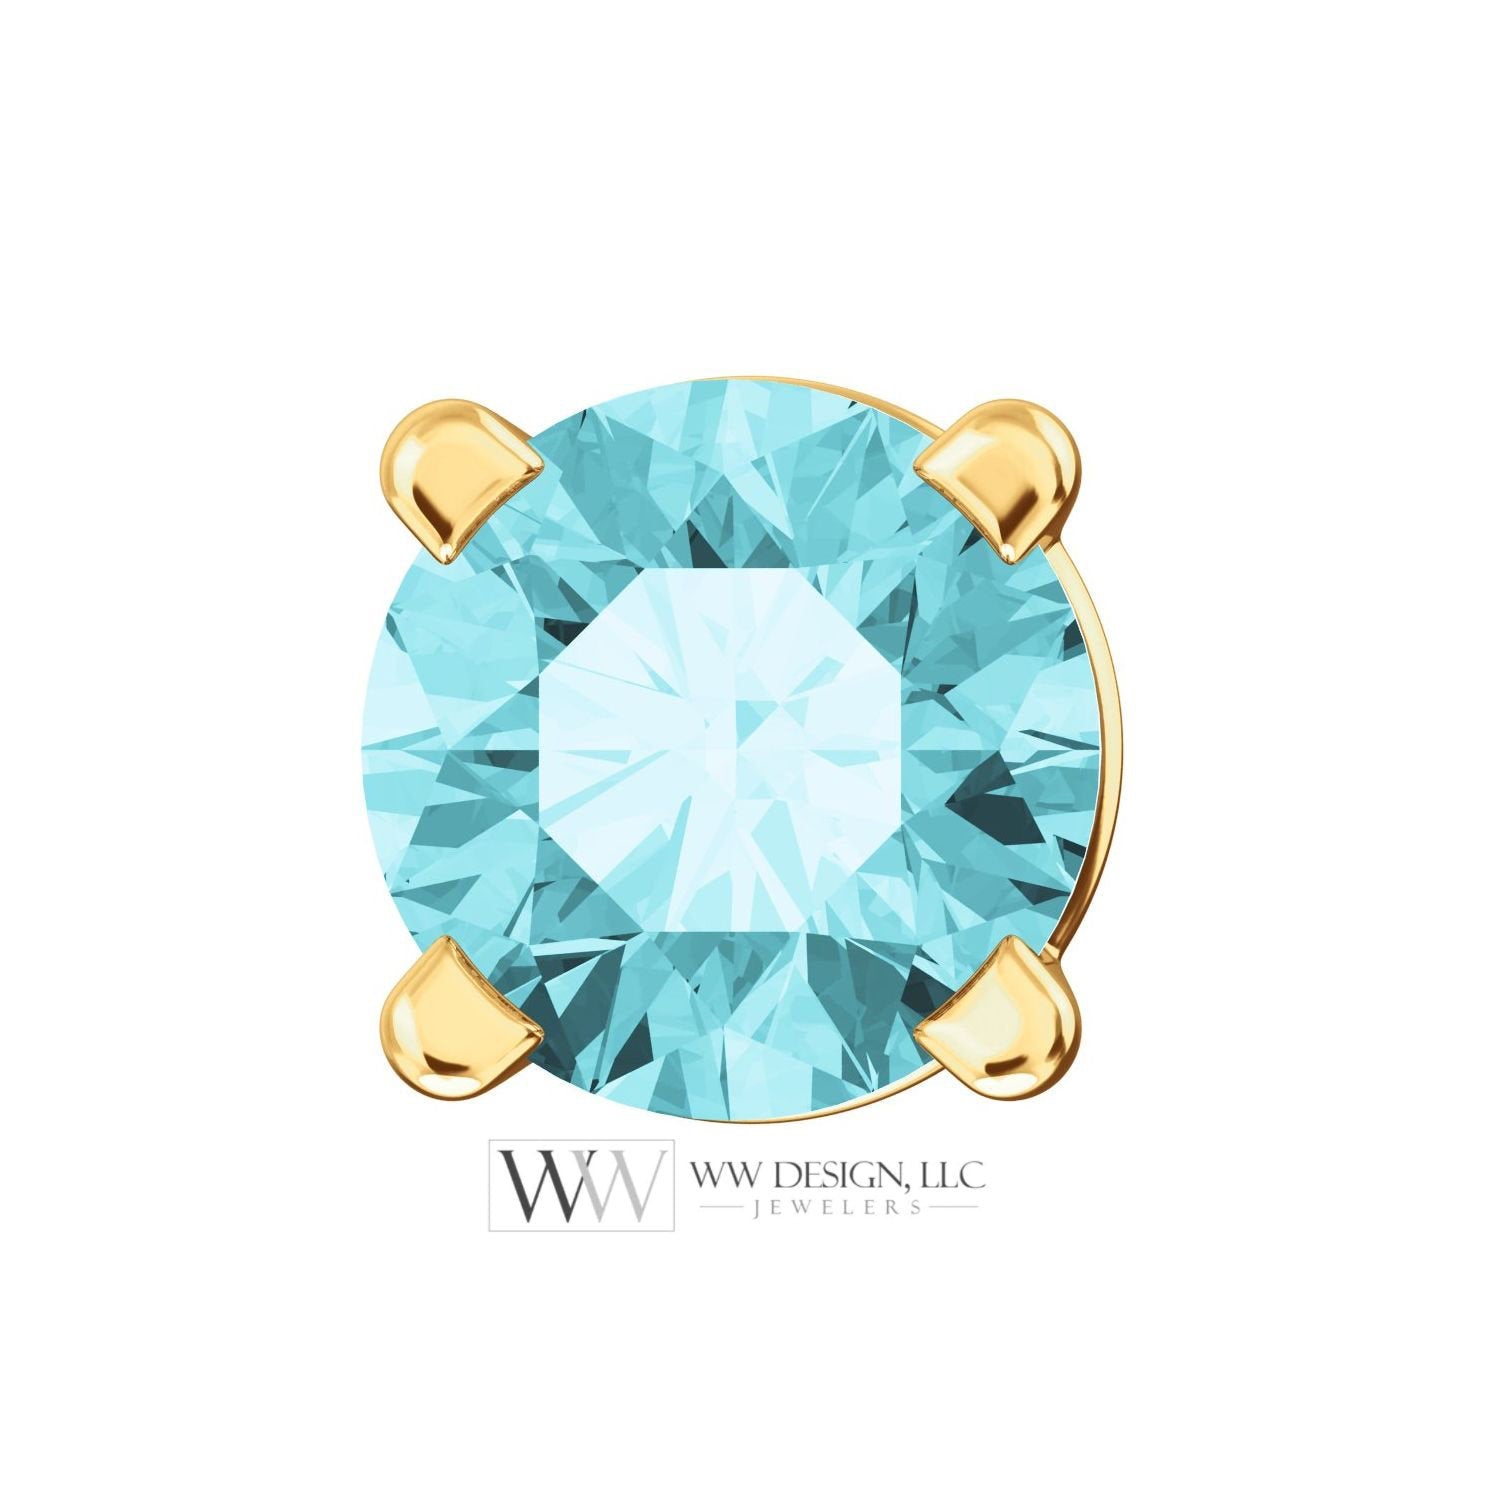 Blue Zircon Earring Studs 4mm 0.8 ctw (each 0.4cts) Post w/ 14k Solid Gold (Yellow, Rose, White)Silver, Platinum Studs December Birthstone